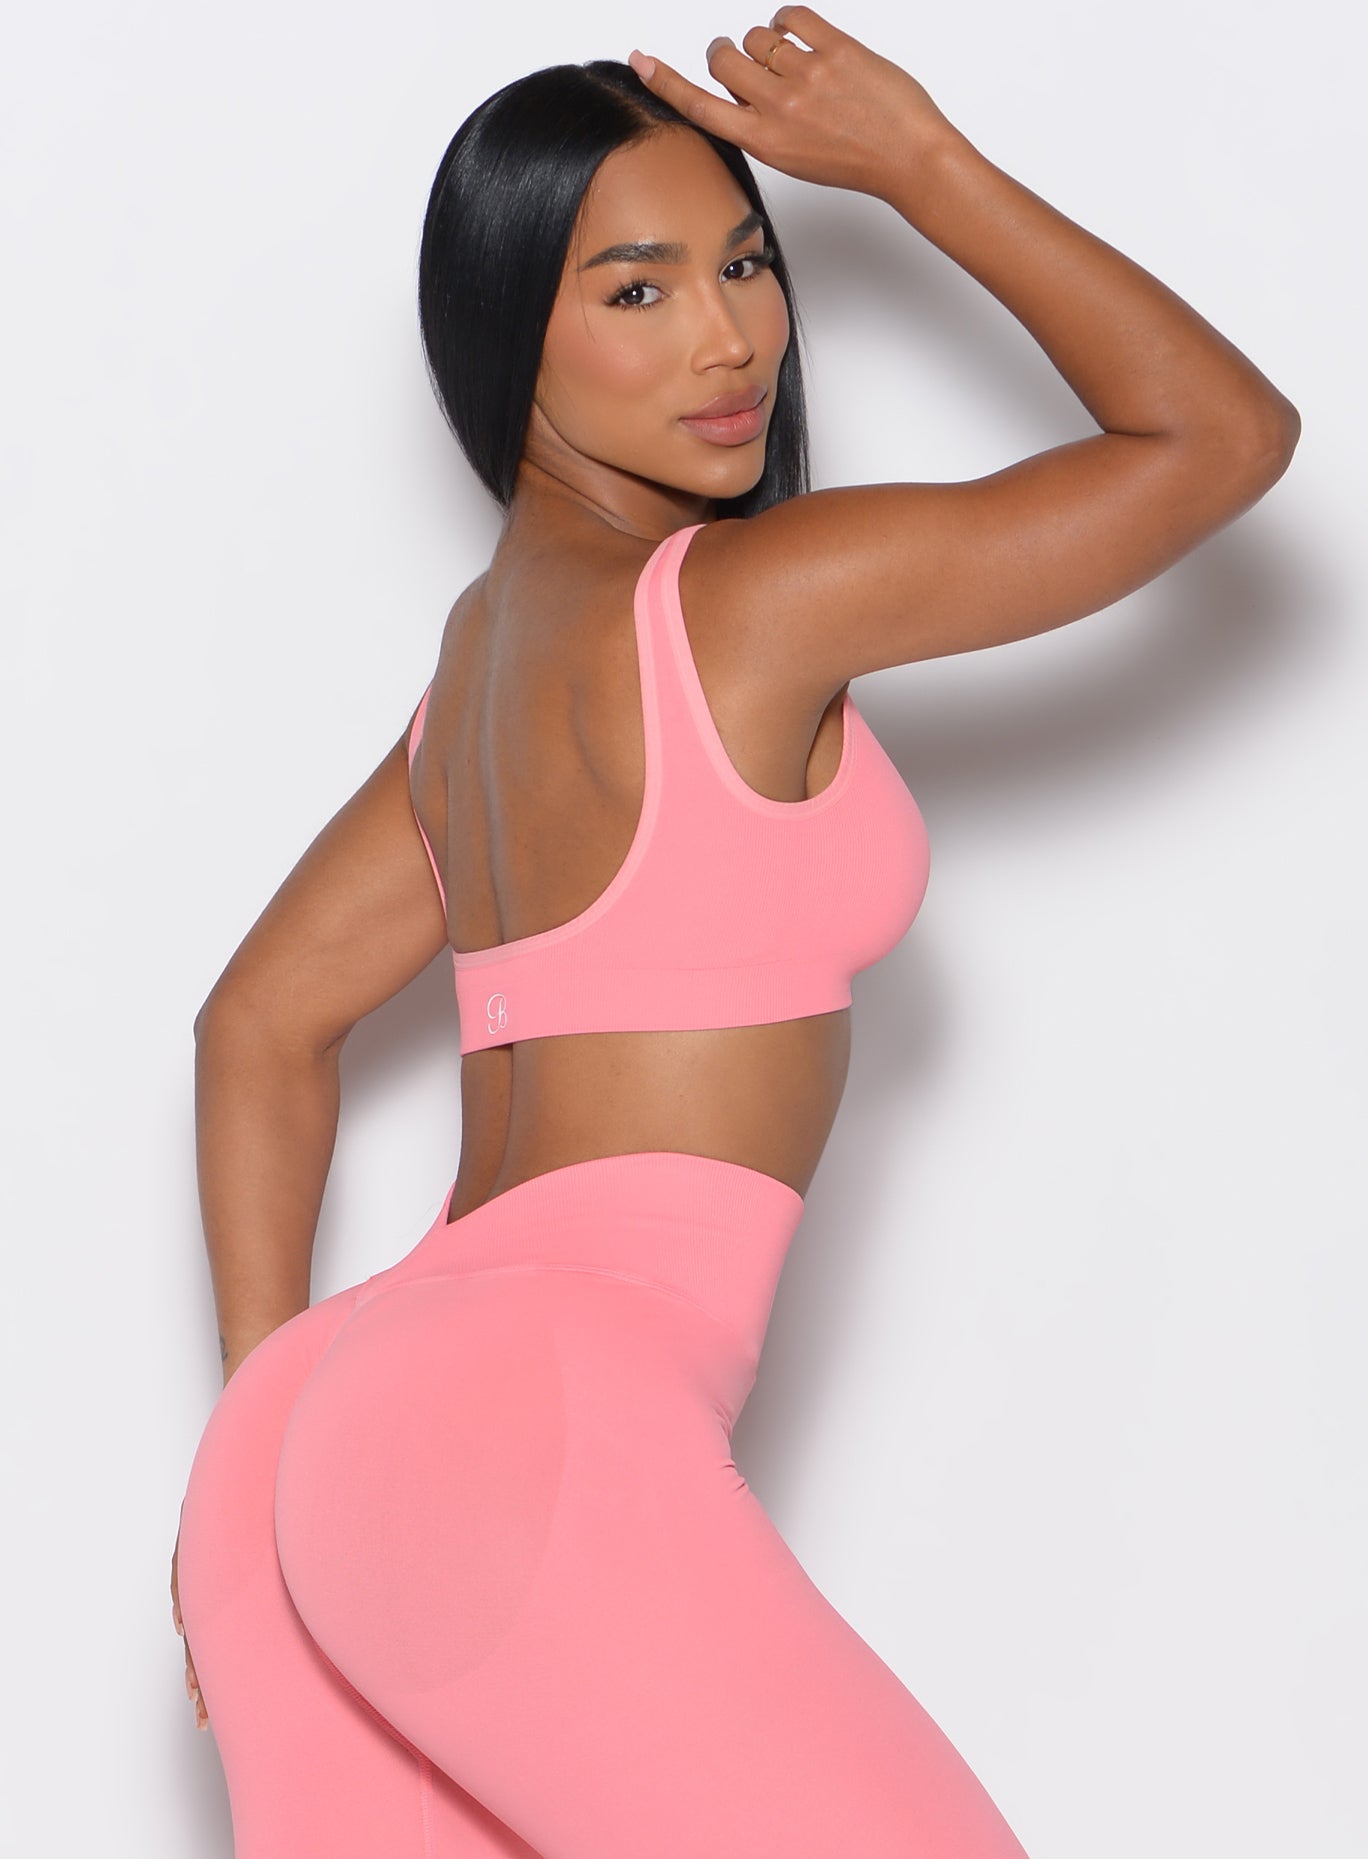 right side profile view of a model facing the camera wearing our square neck bra in flamingo color complemented by a matching shorts